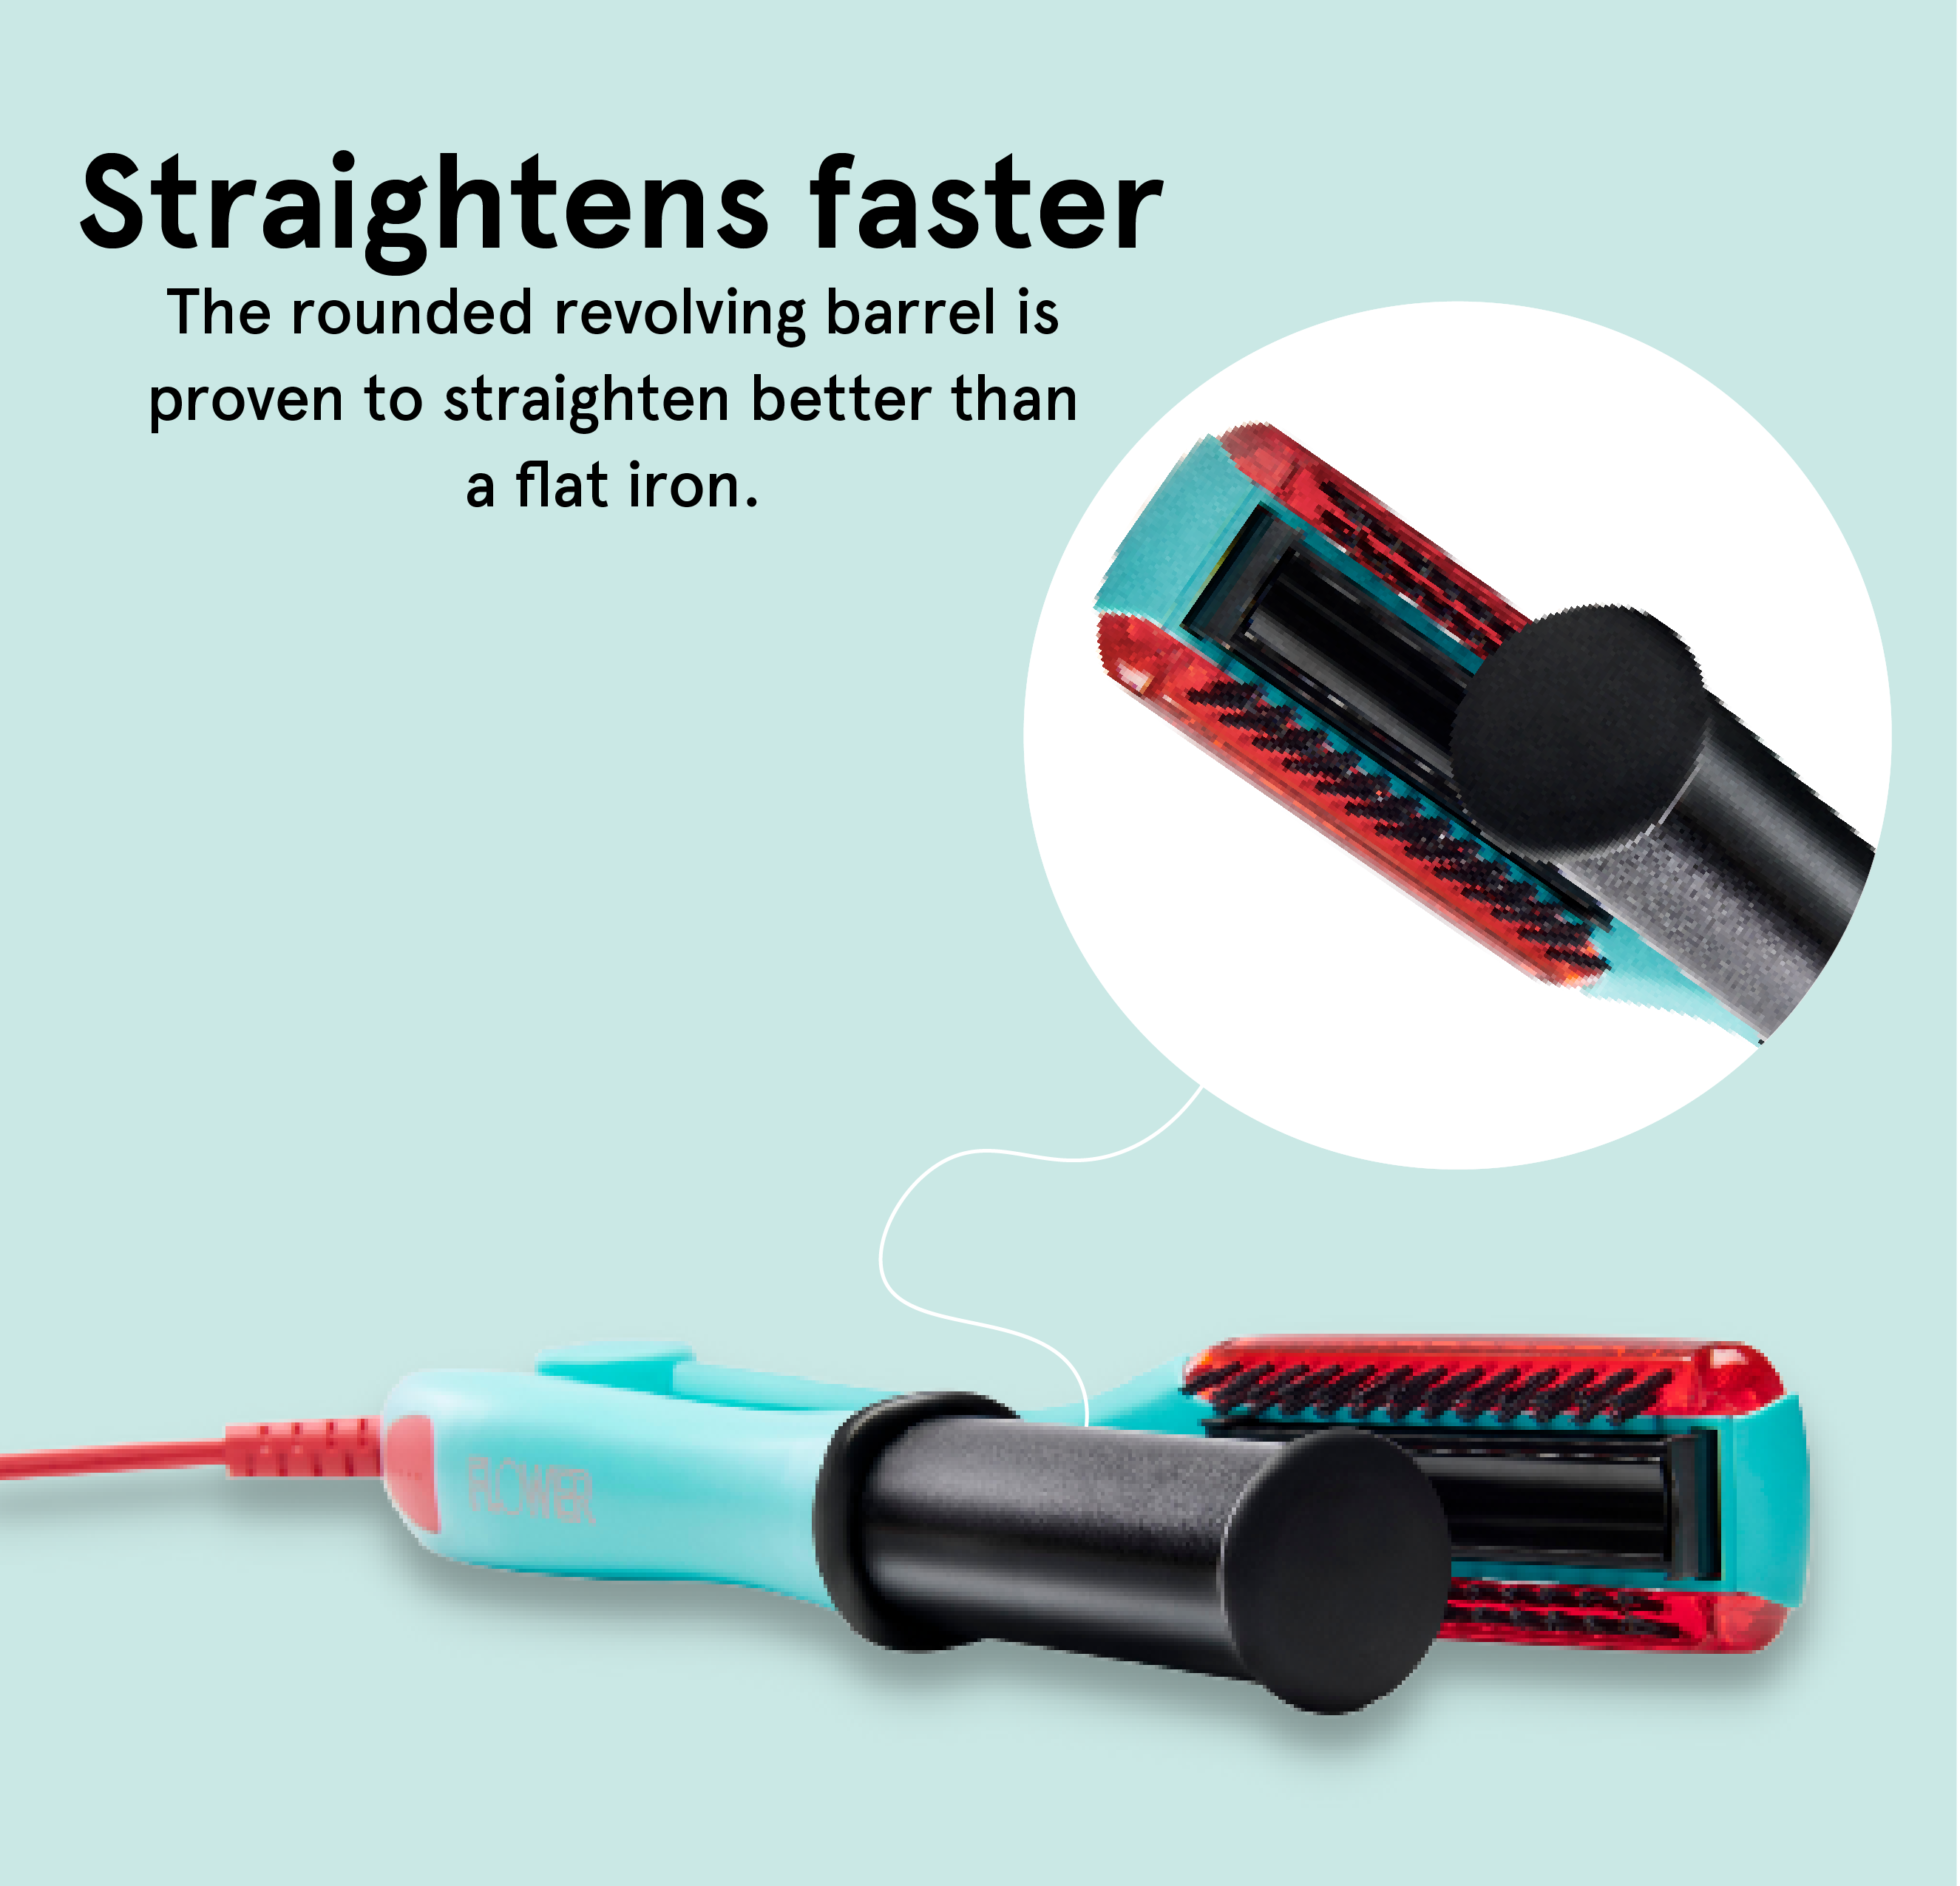 Wet or Dry Styling Iron